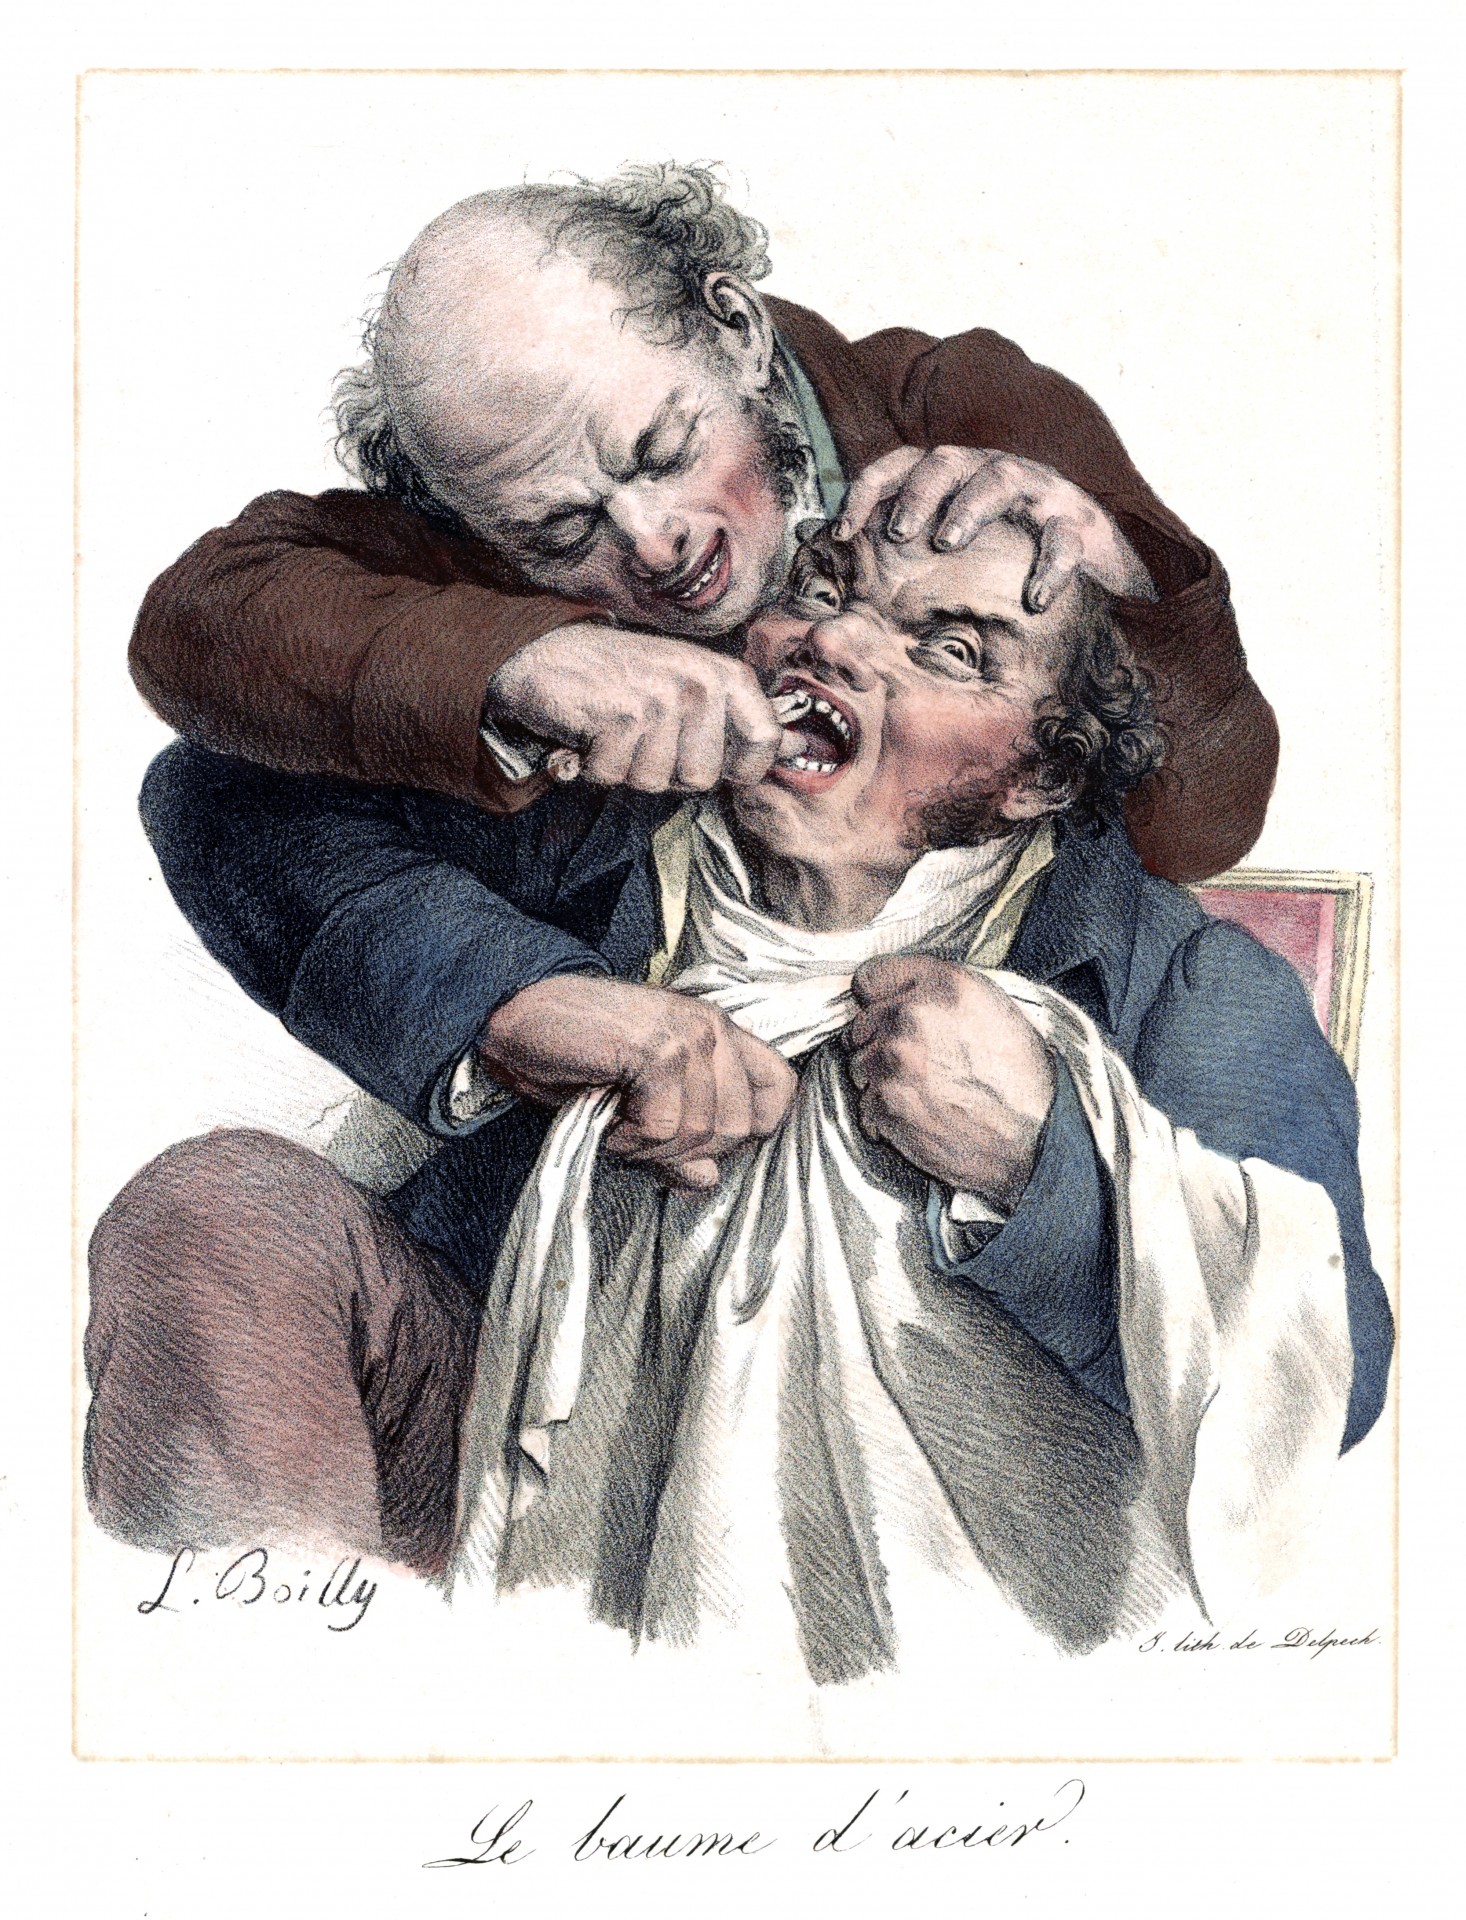 Public domain vintage illustration of a man having his tooth pulled